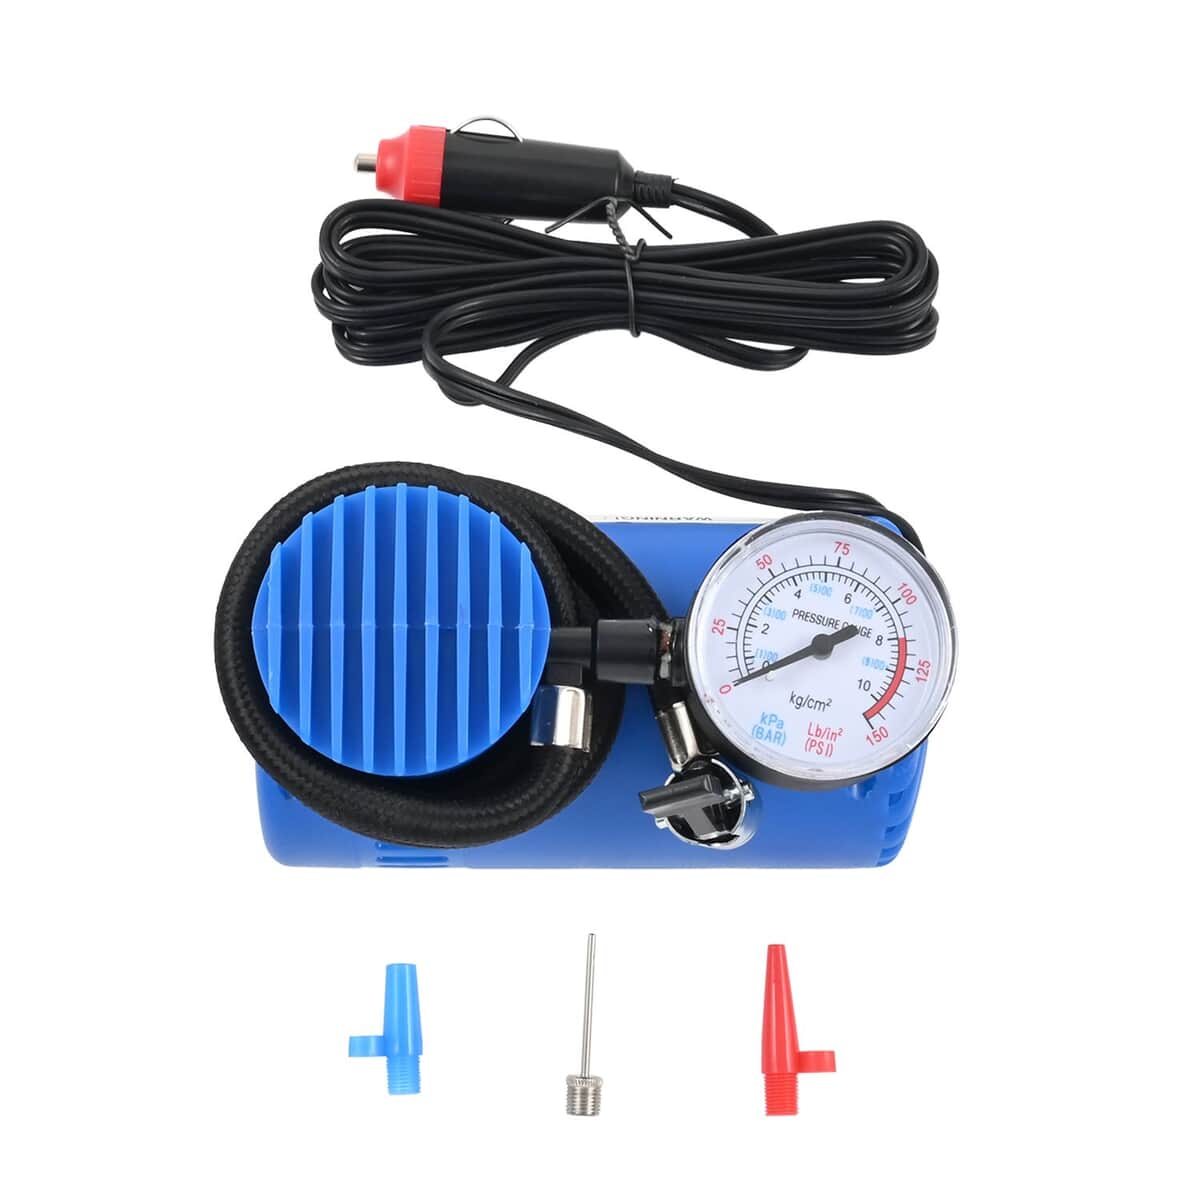 AUTO EFFECTS Blue Portable Mini Air Compressor for Tire Inflation, 12Volt DC Powered, Built-in Pressure Gauge, Inflates Automobile tires, Bike tires image number 5